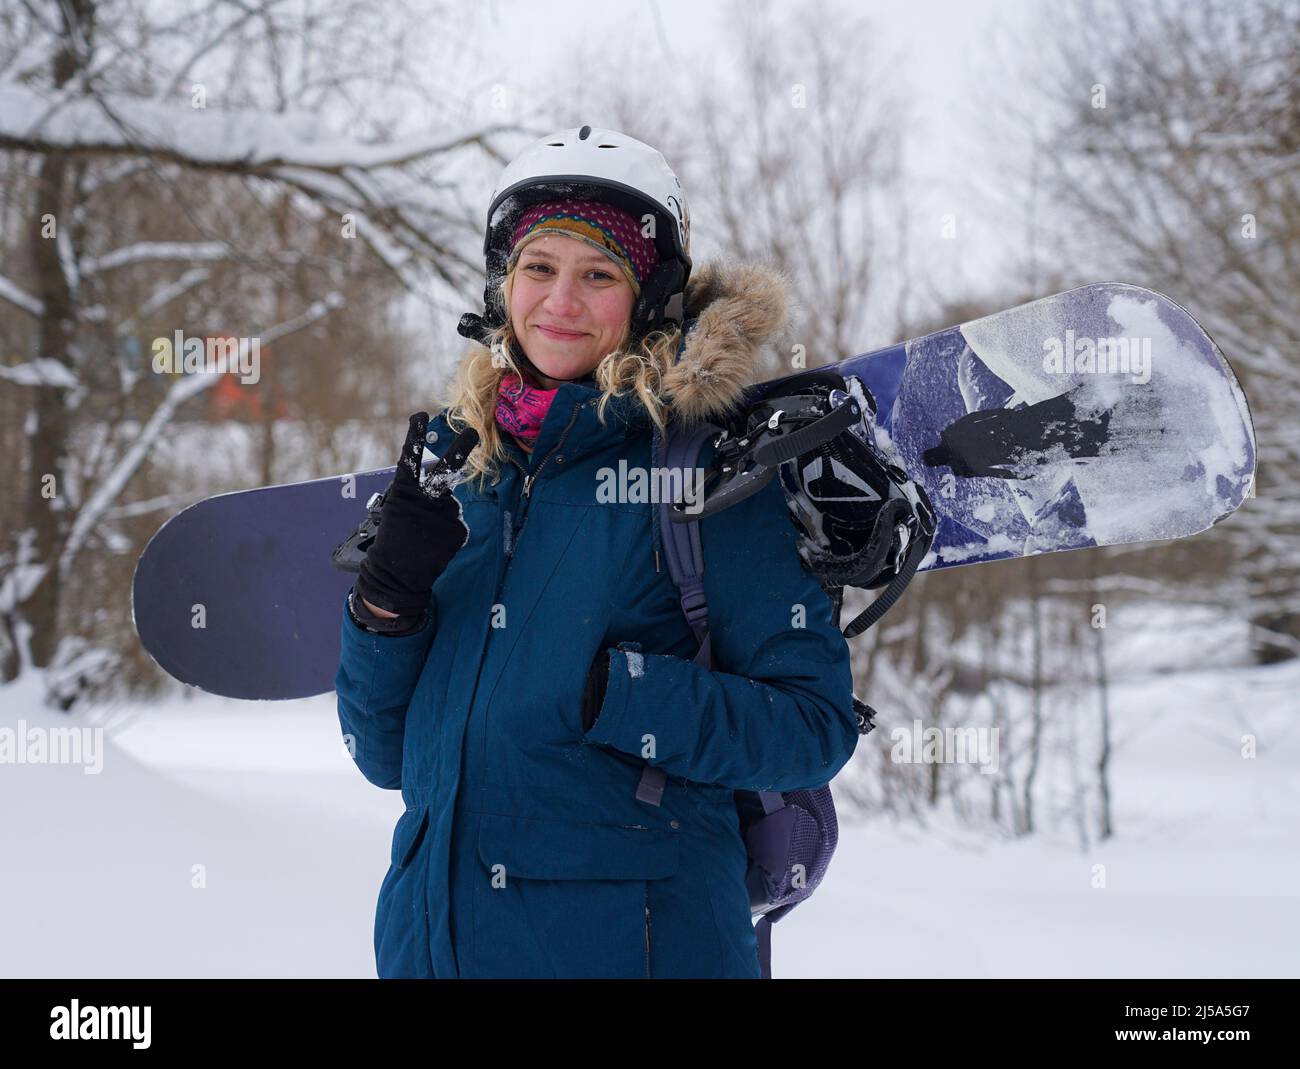 The girl holds a snowboard in her hands, she is dressed in a mountain jacket and a helmet Stock Photo